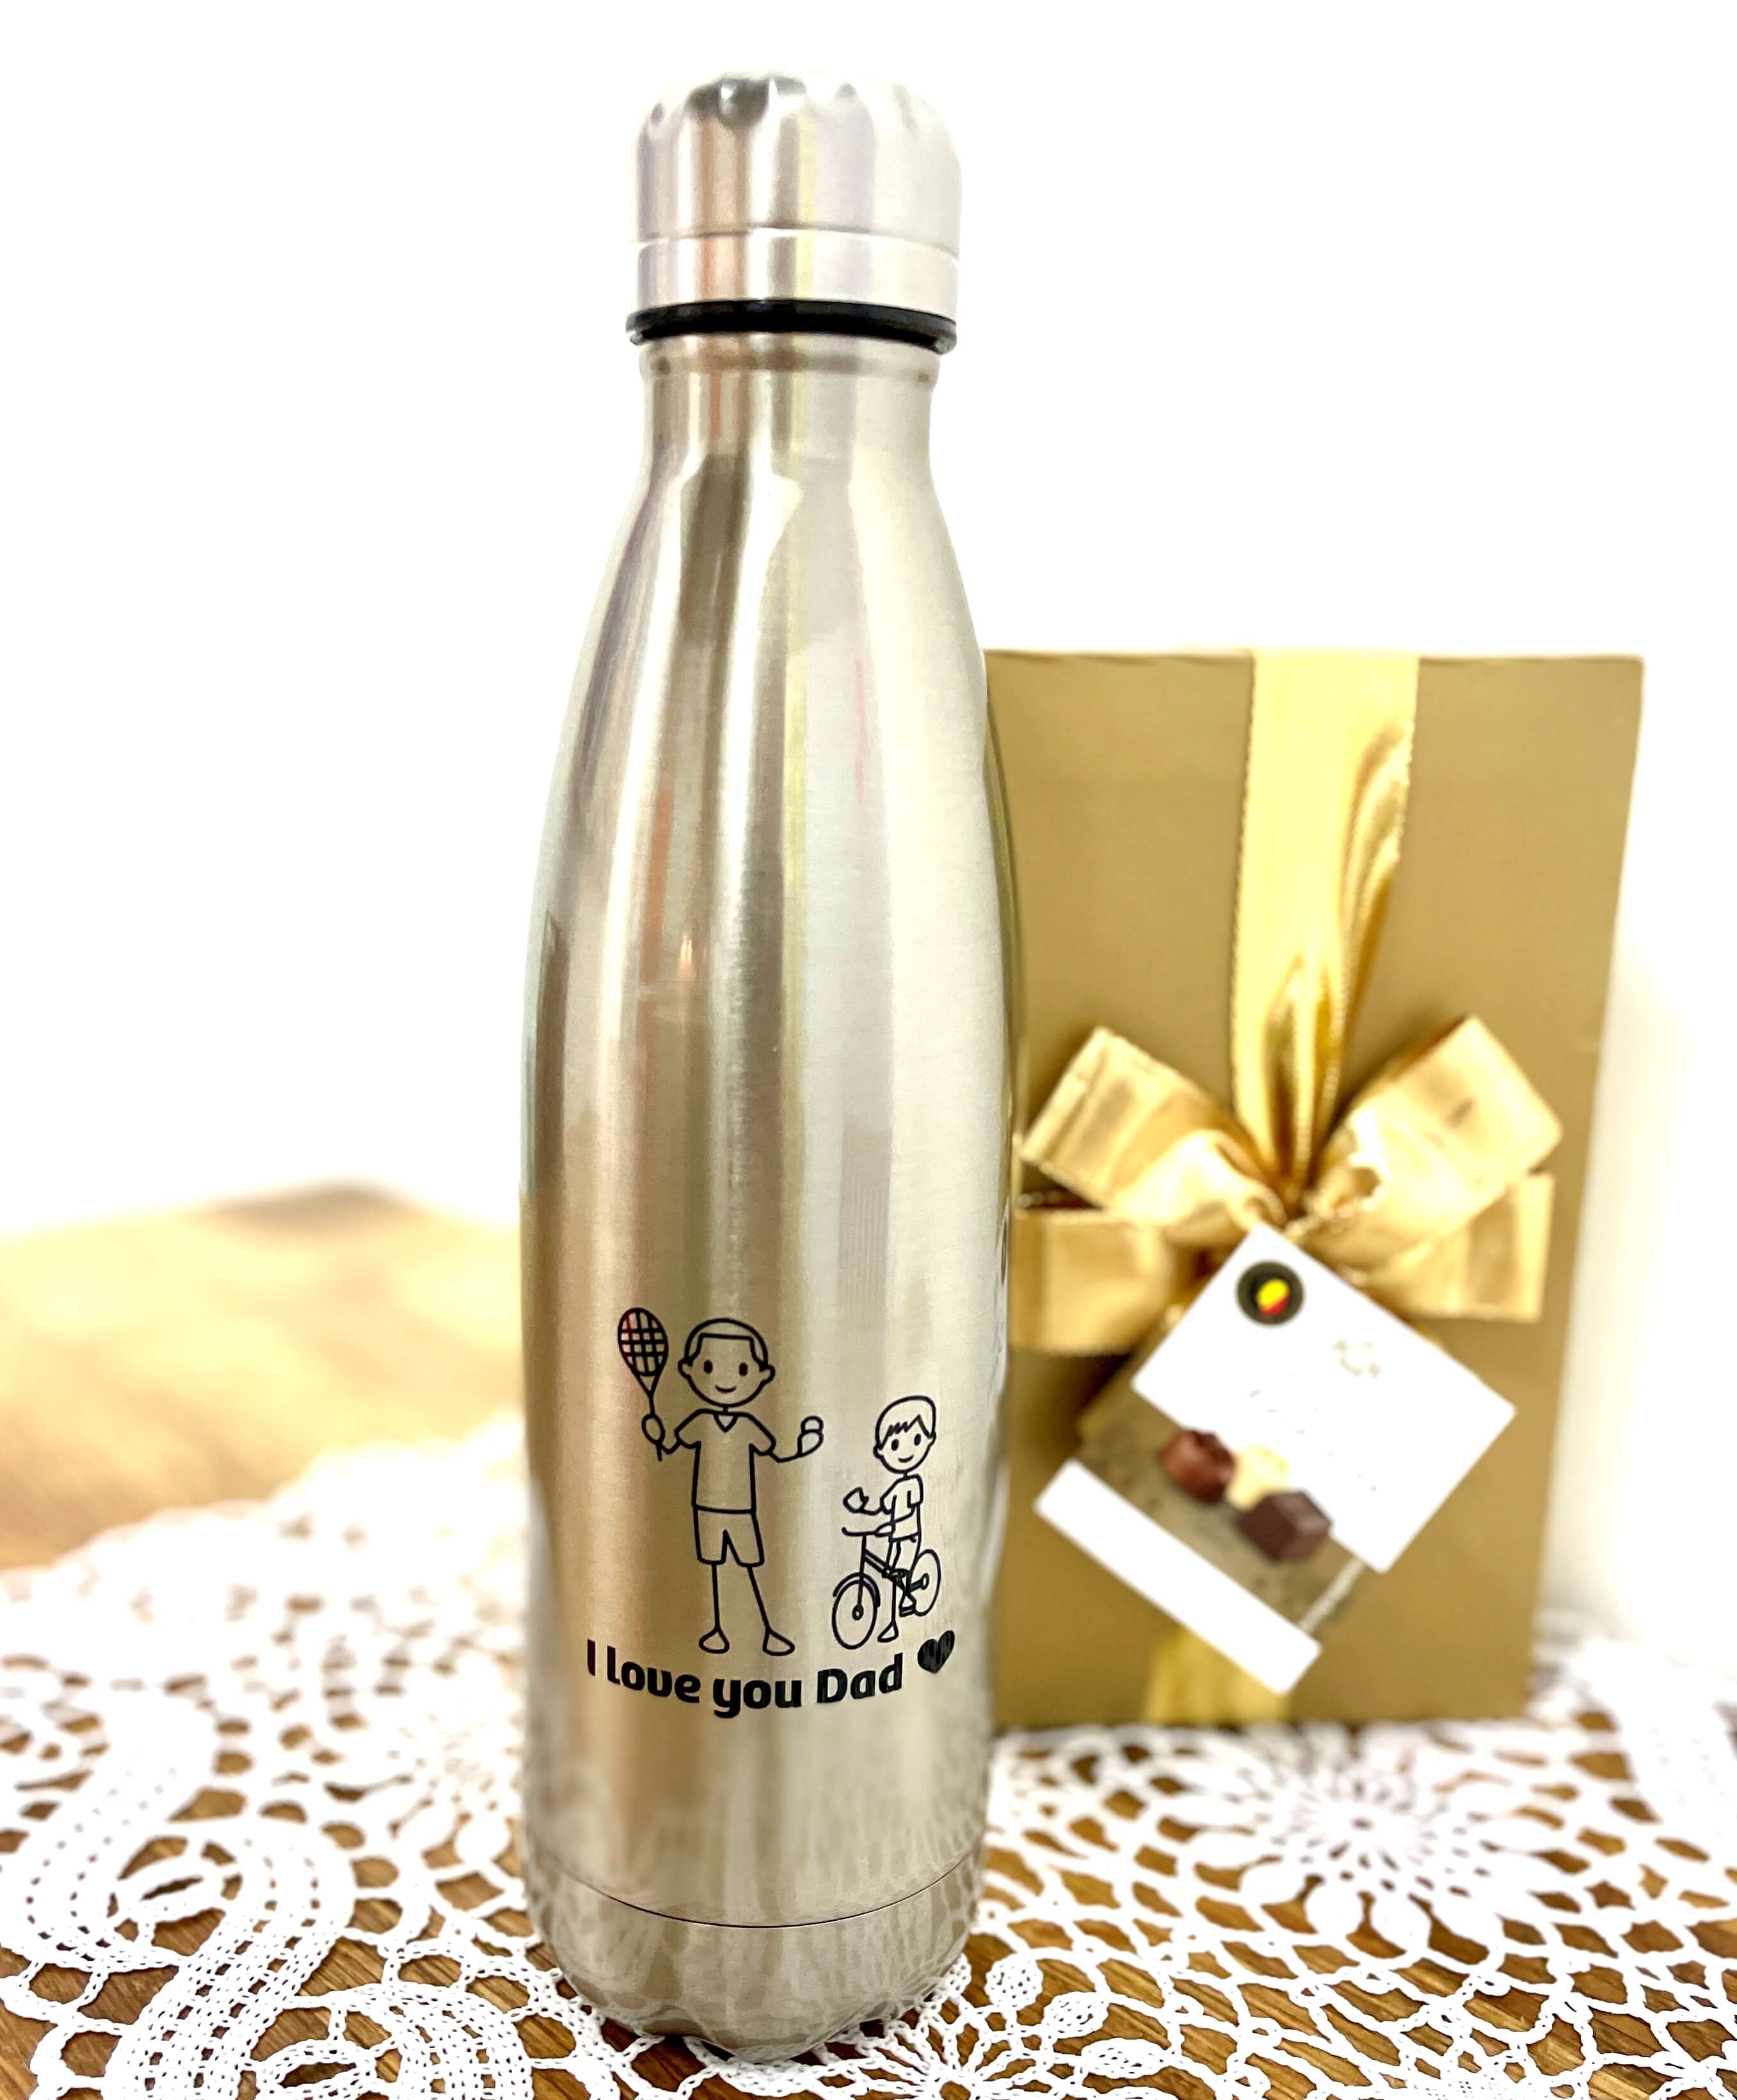 Personalised water bottle as father's day gift ideas